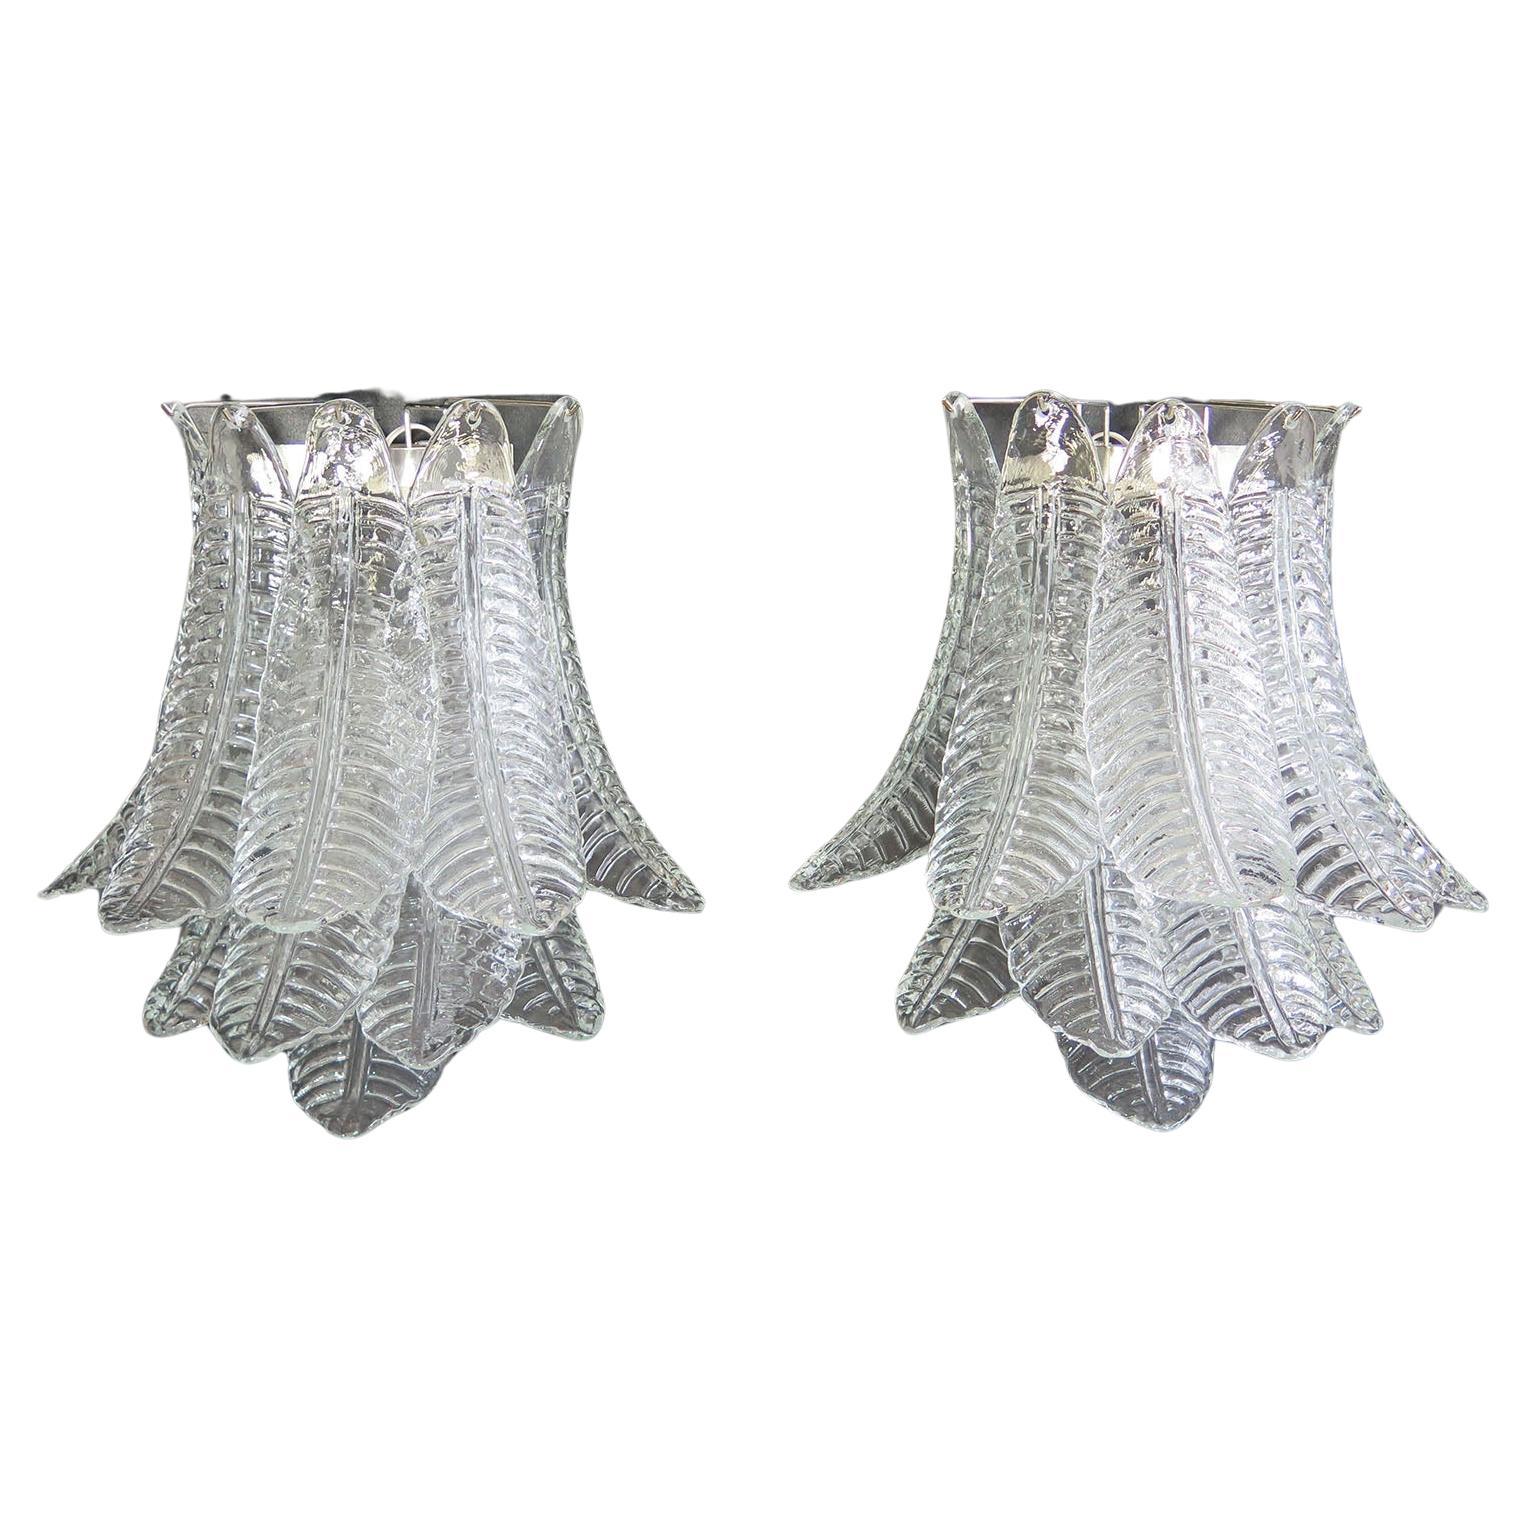 Pair of Vintage Murano Six-Tier Felci Wall Sconces For Sale